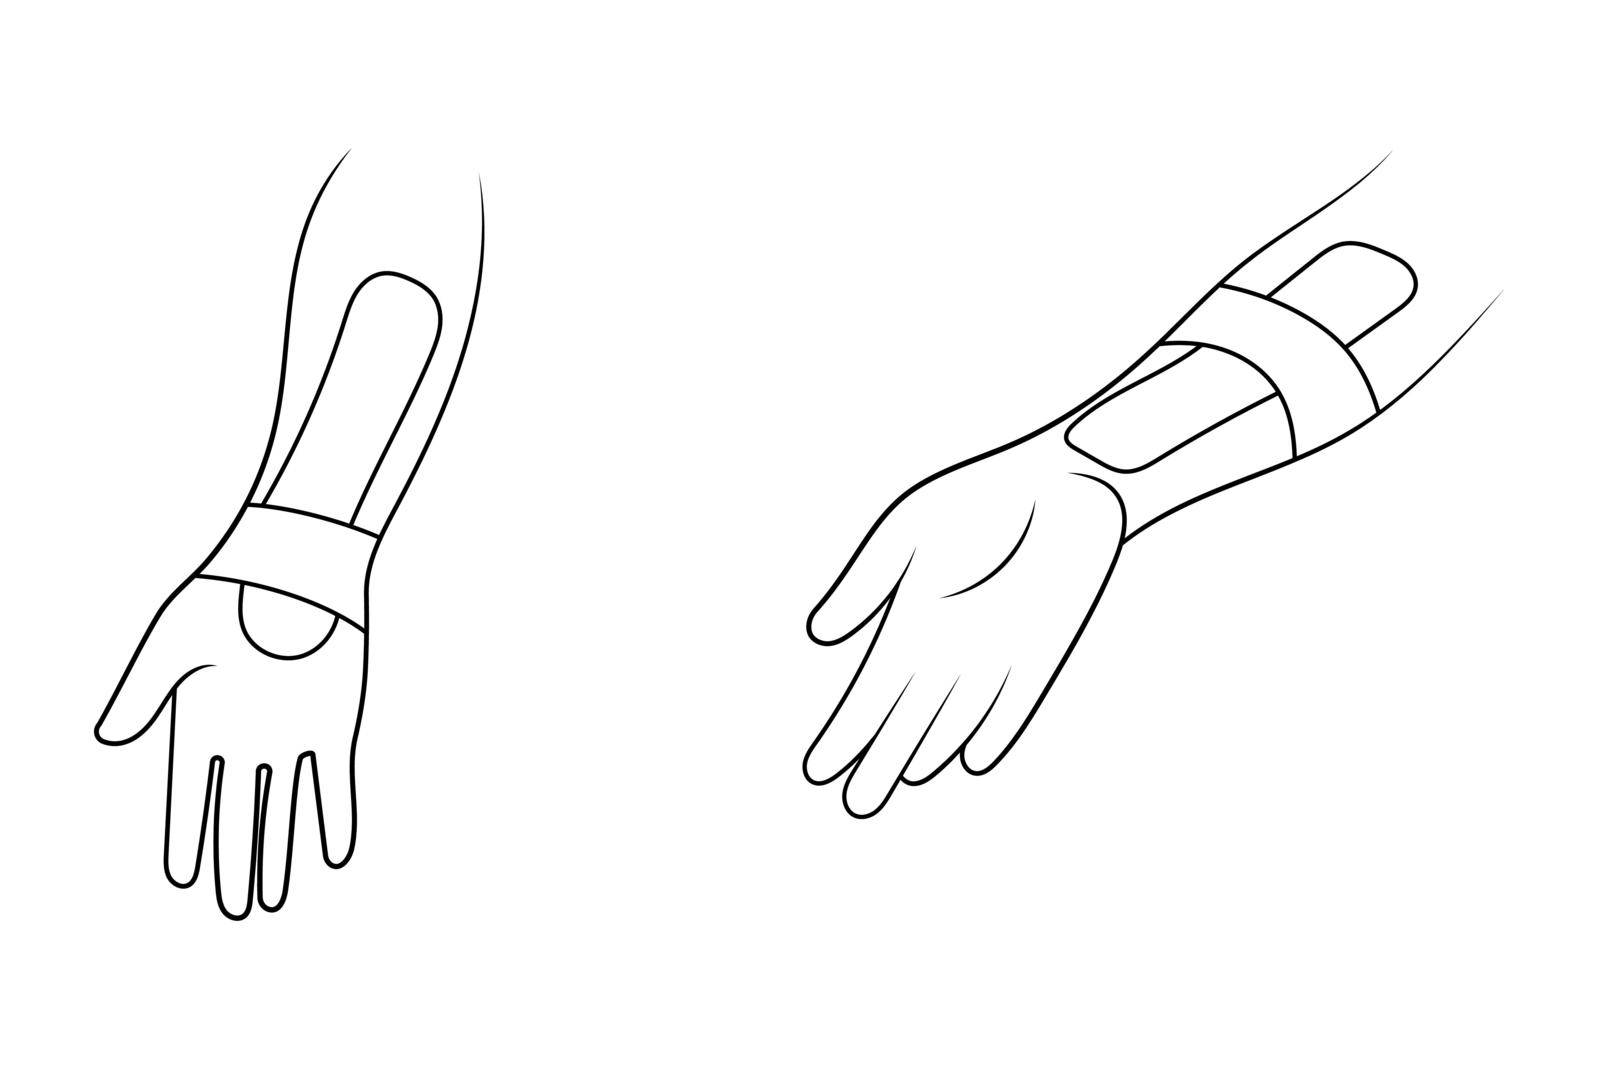 Kinesiology therapeutic sports tape on wrist sketch vector illustration.